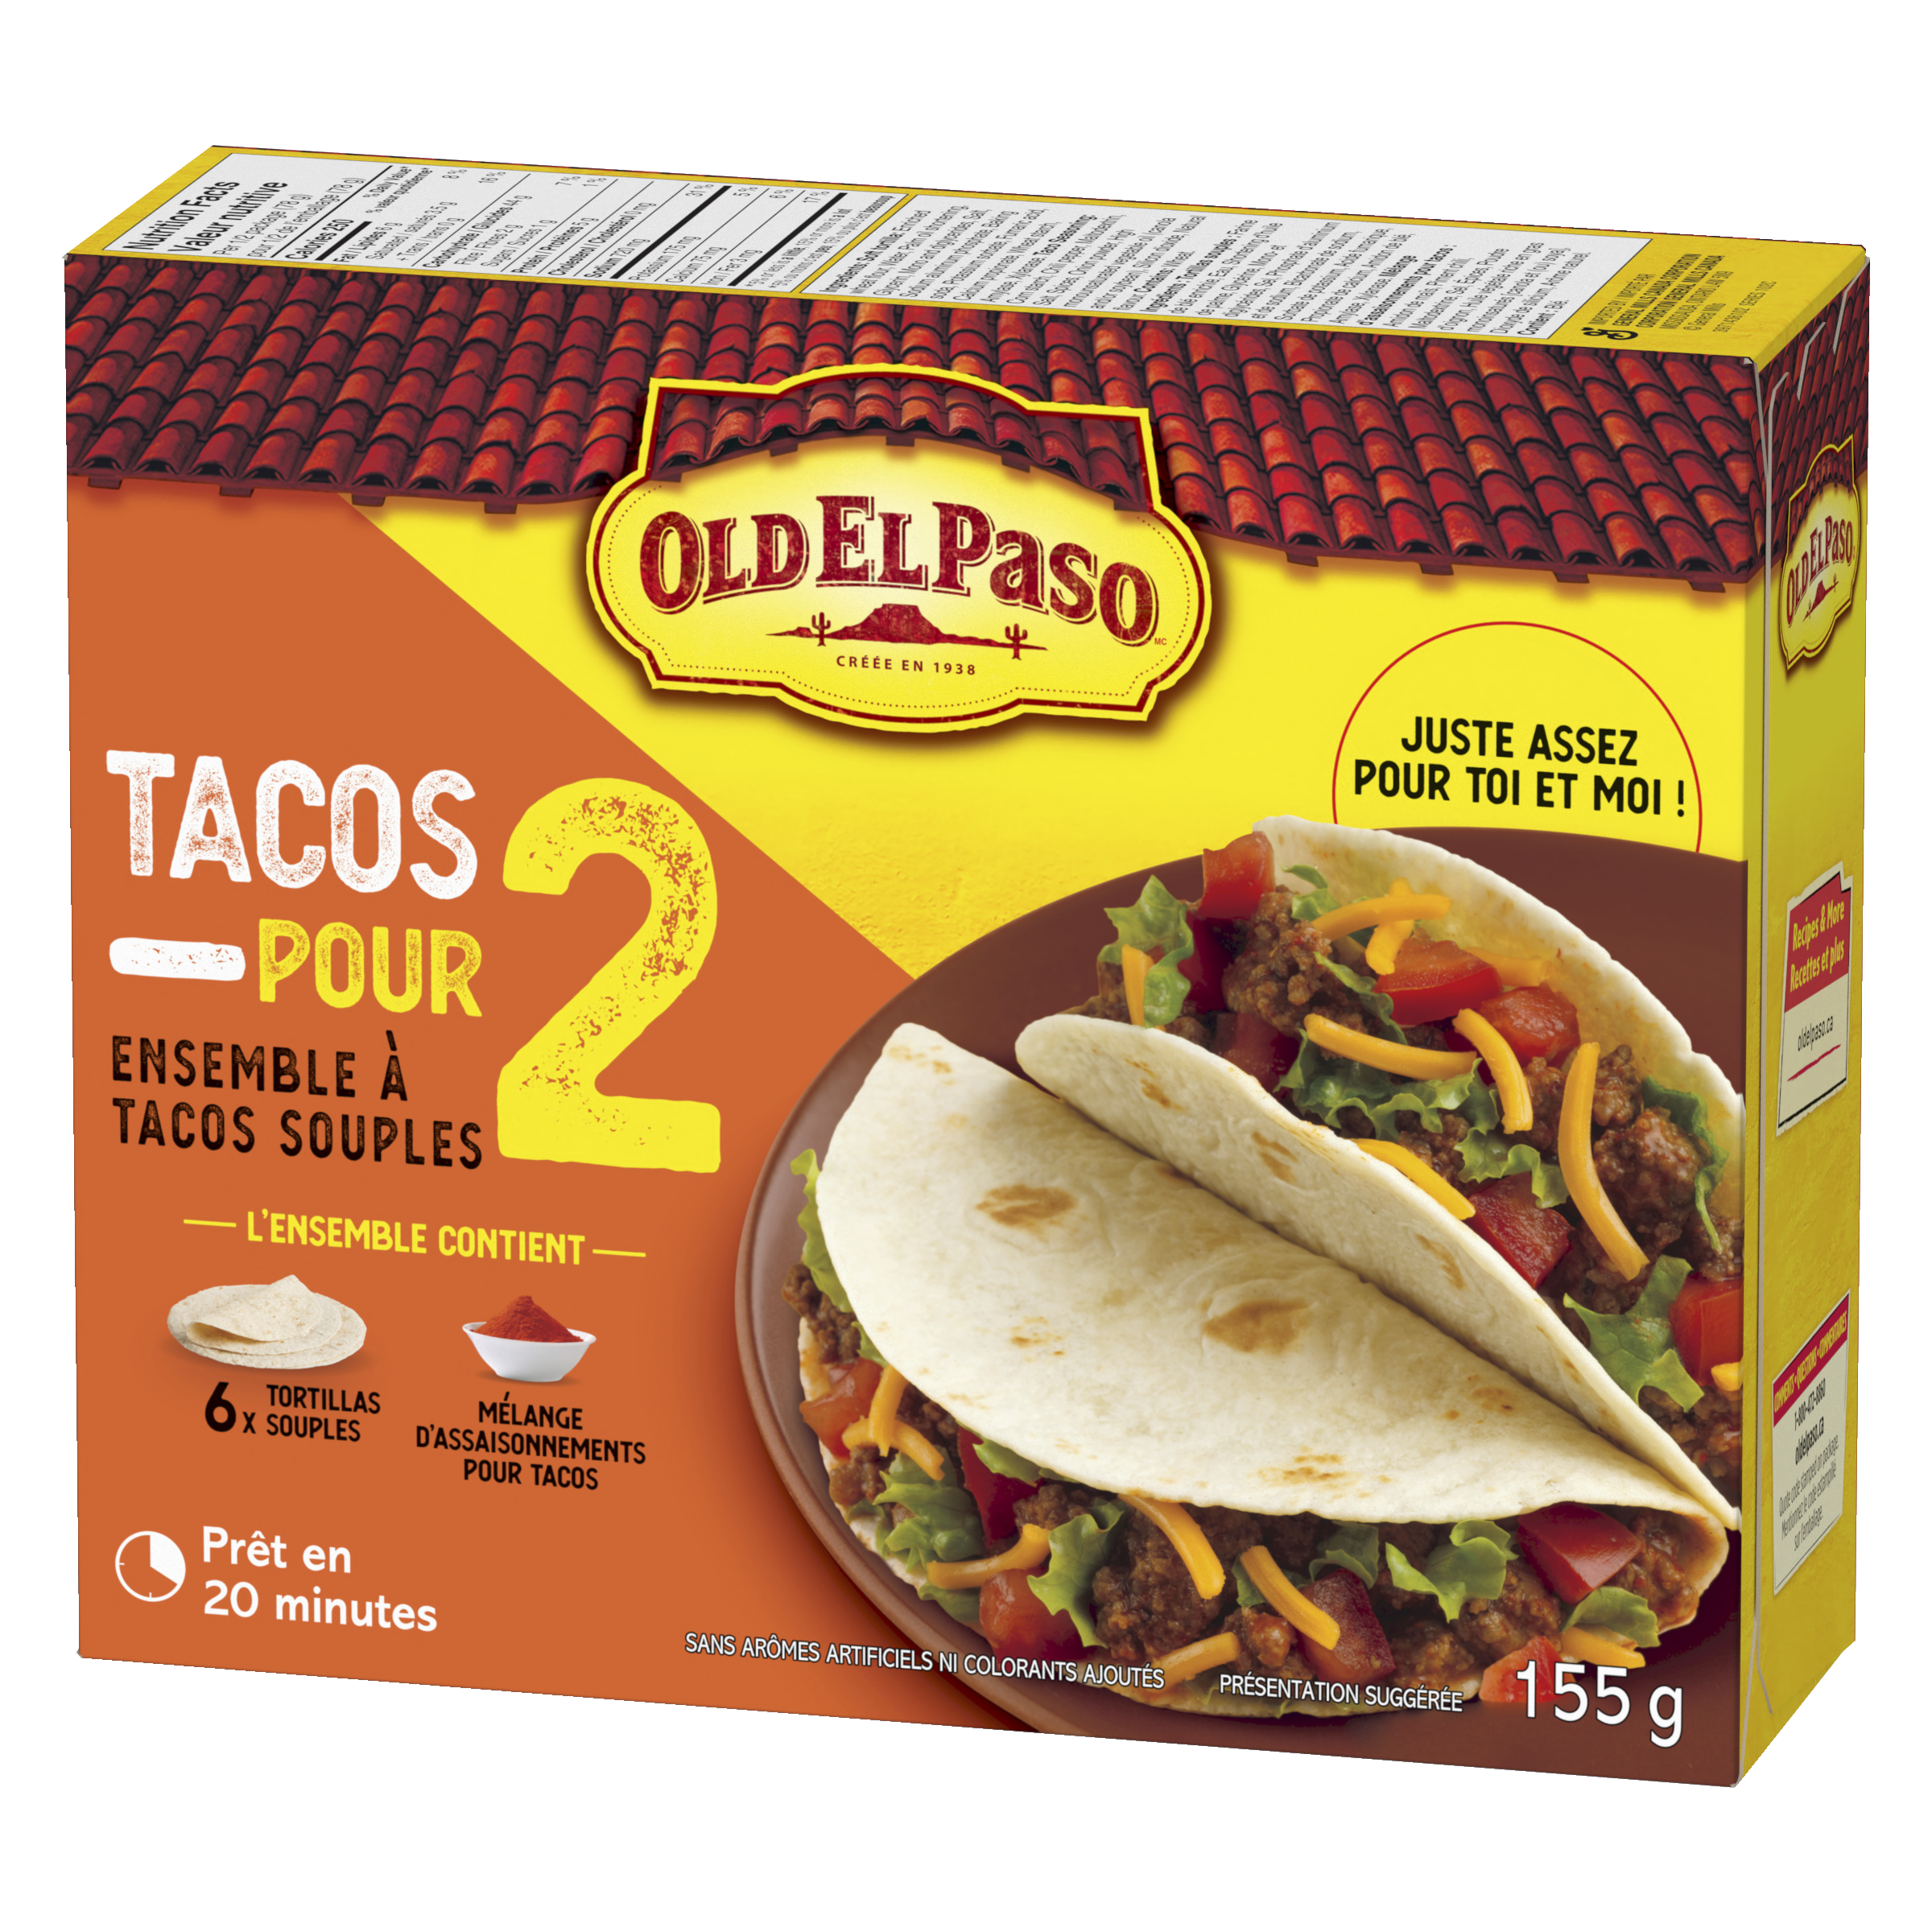 Tacos for Two Soft Taco Dinner Kit